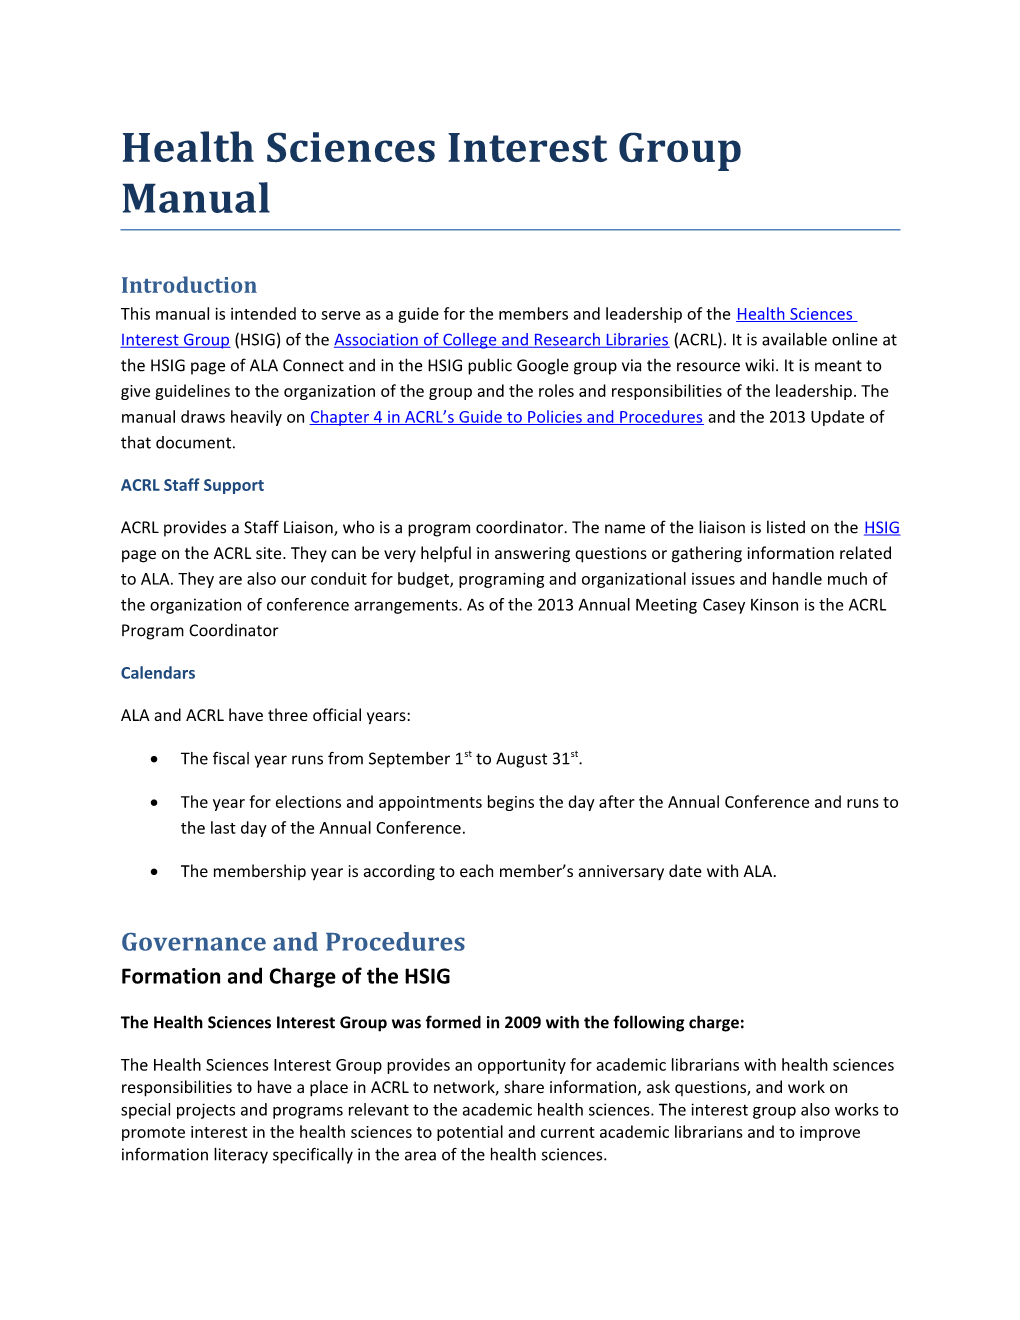 Health Sciences Interest Group Manual